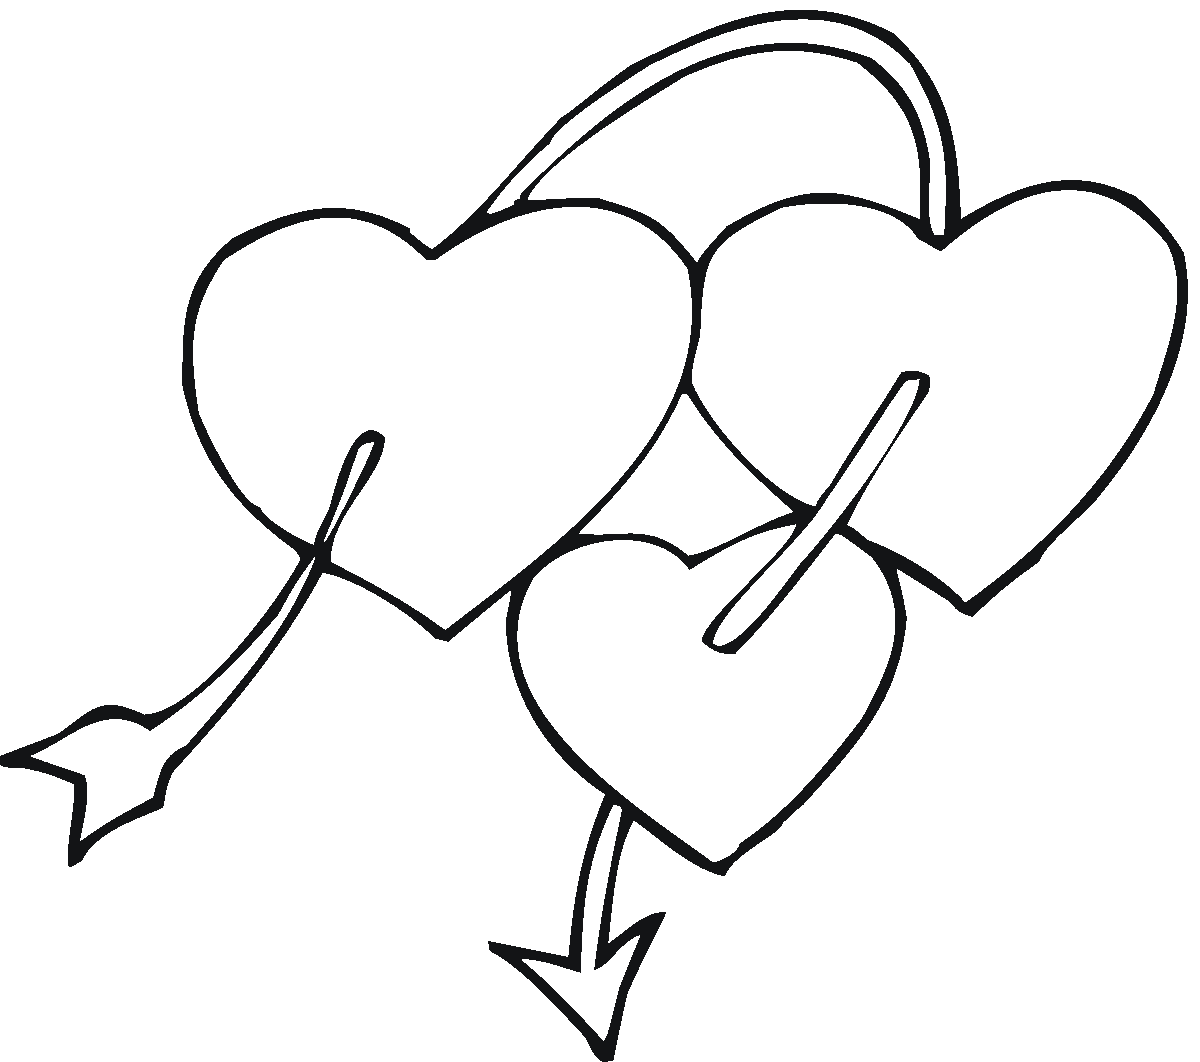 Easy Connected Hearts Coloring Page